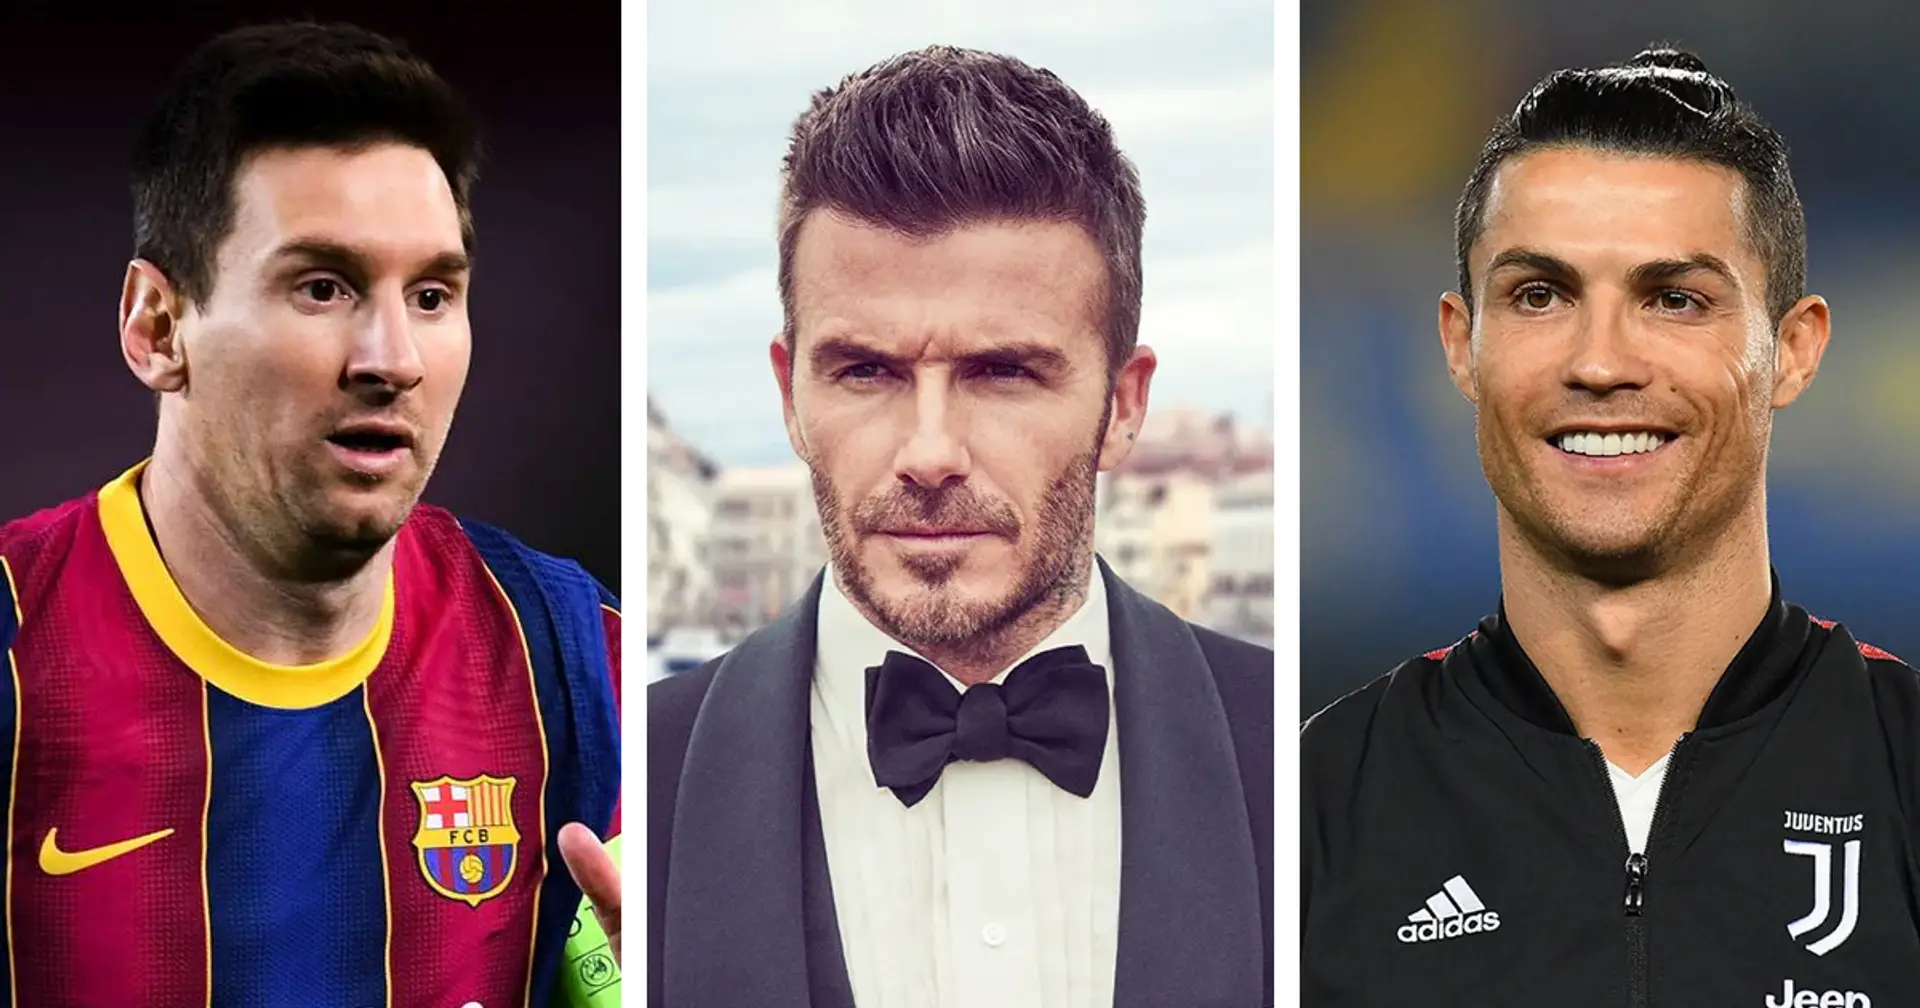 'Our fans want to see big stars': Beckham considers signing Ronaldo & Messi for Inter Miami